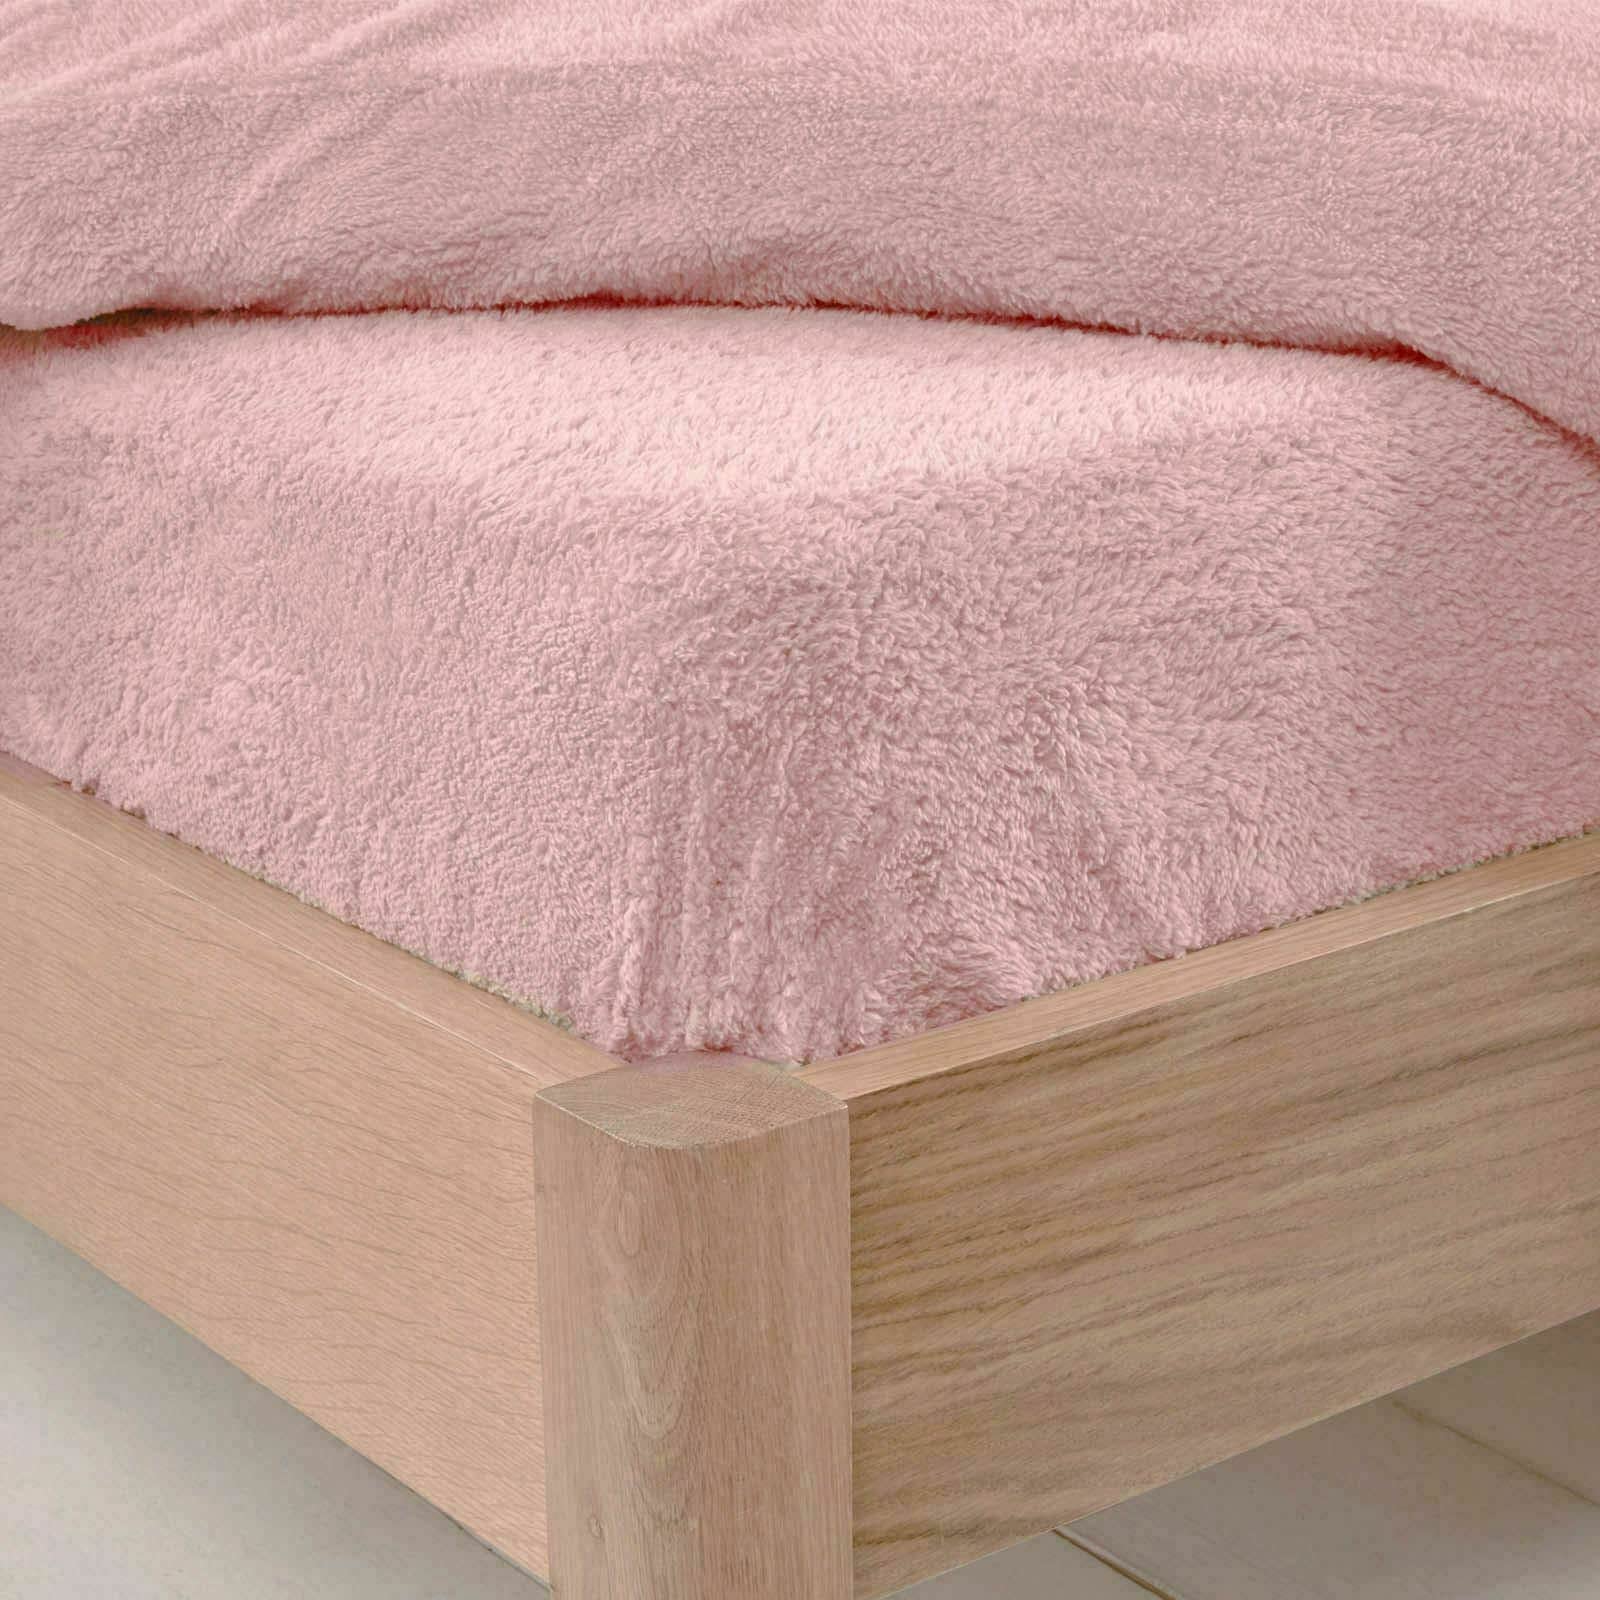 Lifestyle Production @ Super Soft Teddy Fleece Fitted Sheet ,Warm Cosy (Pink, Double)